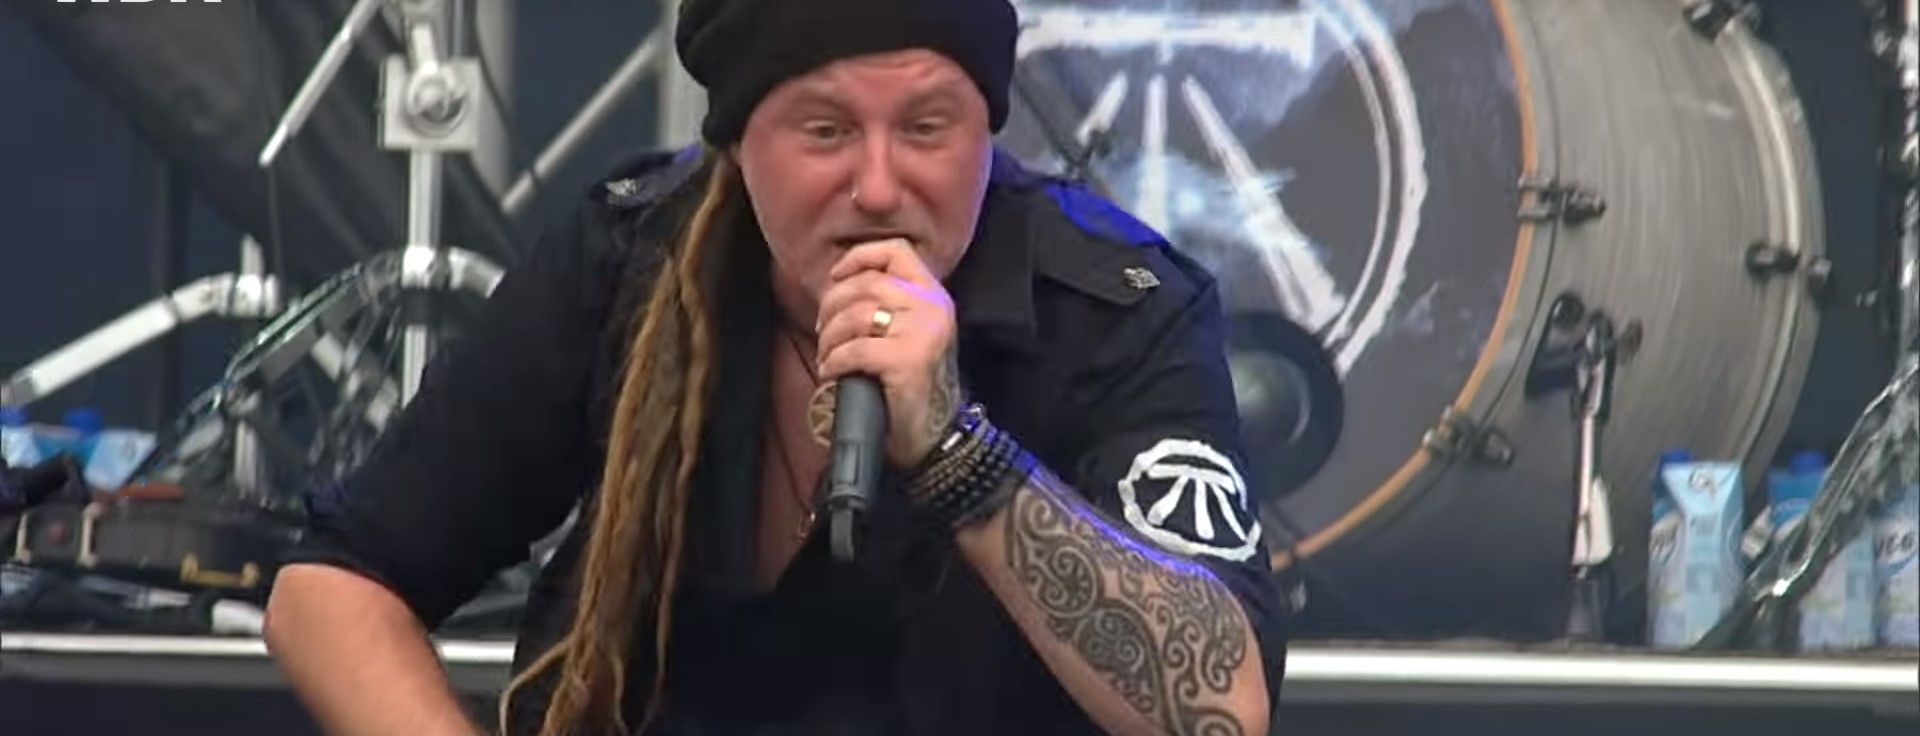 Eluveitie - Live At Summer Breeze 2019 (Full)